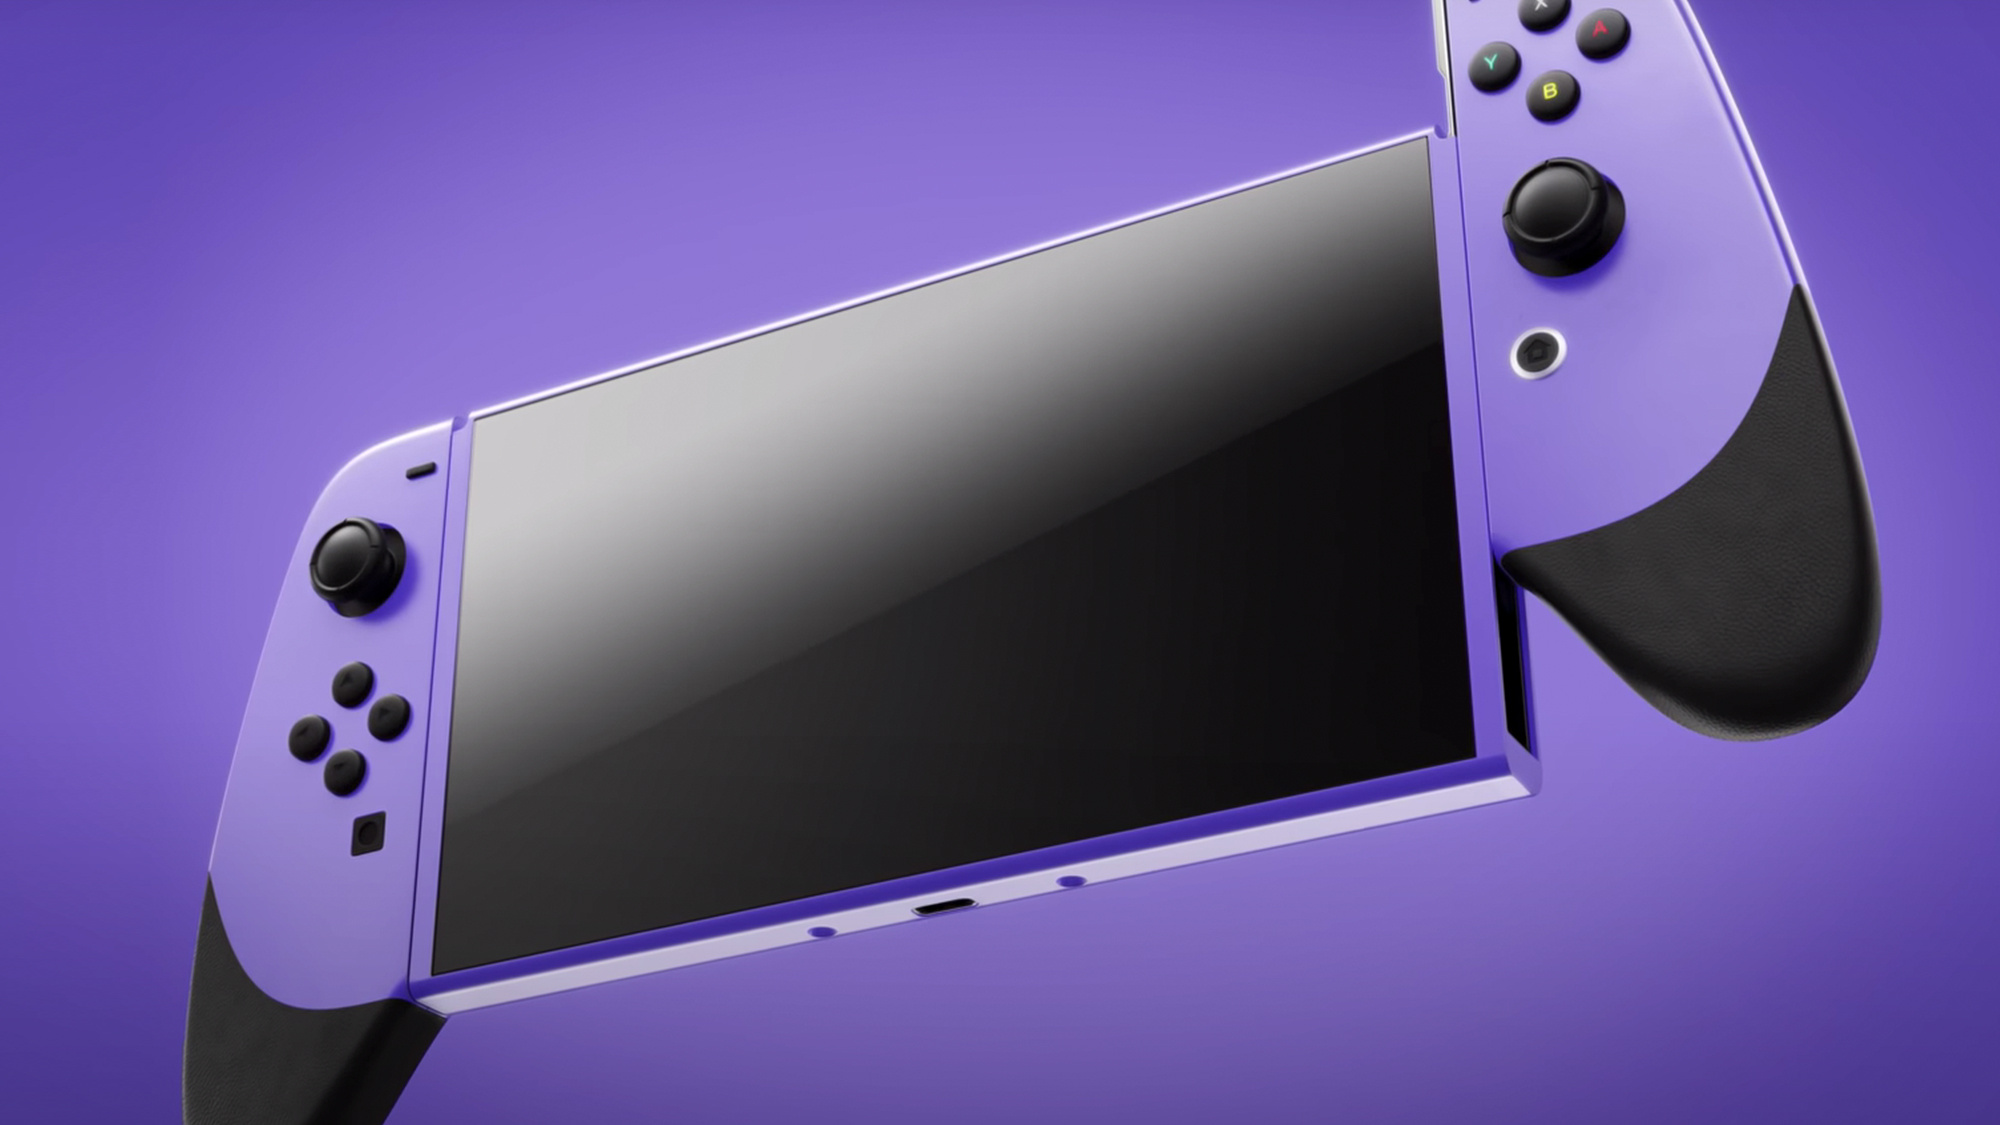 Switch Pro rumors, All the details, Speculation roundup, Pro gaming, 2000x1130 HD Desktop